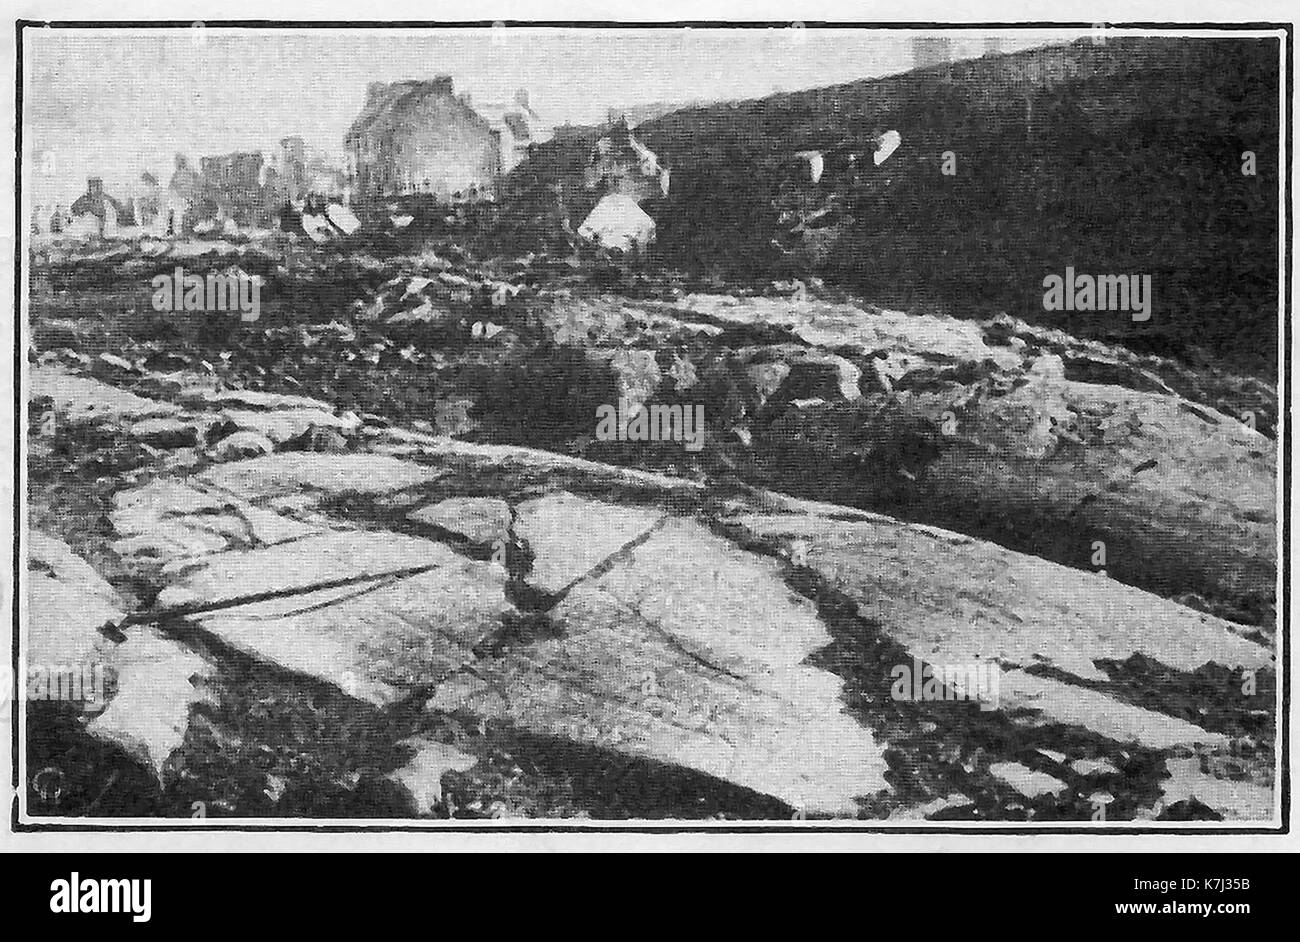 A 1914 image from the city of Stirling, Scotland showing ancient rocks scoured and cracked by glaciers in ancient times Stock Photo